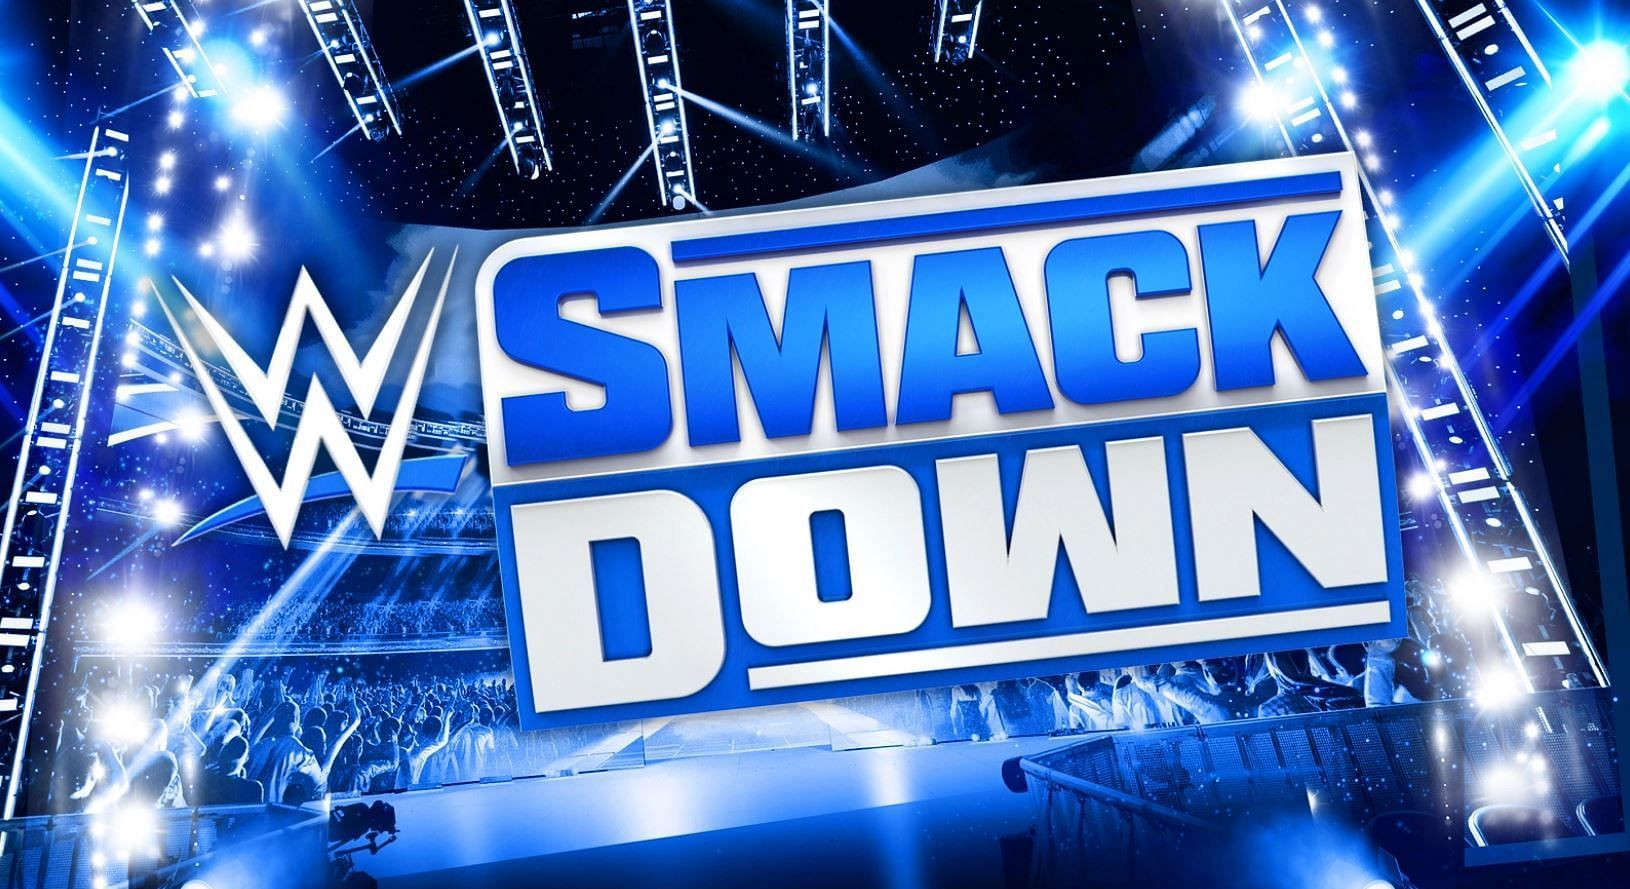 WWE SmackDown will be live from Florida tonight!